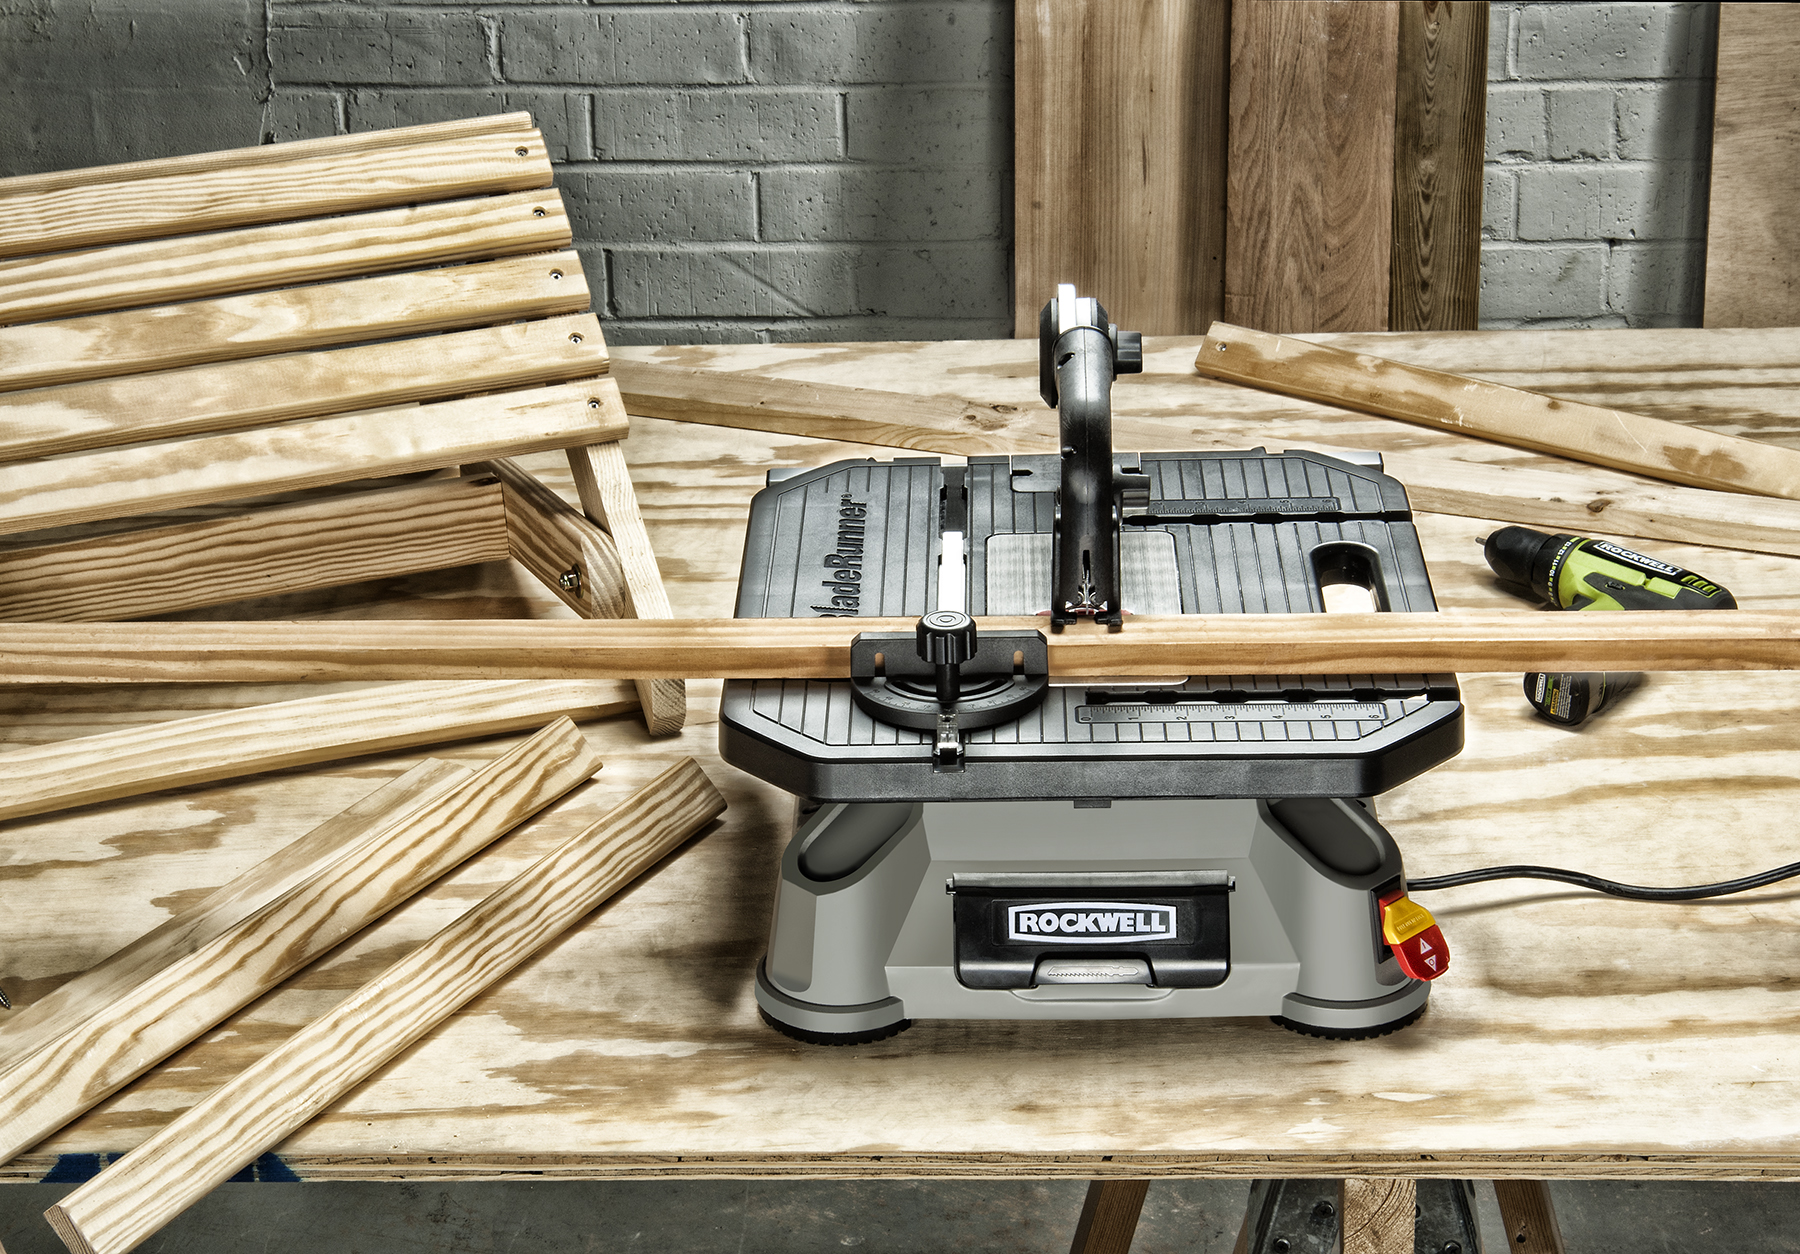 Rockwell BladeRunner X2 is a versatile, lightweight, benchtop saw that's easy to carry close to the project site.